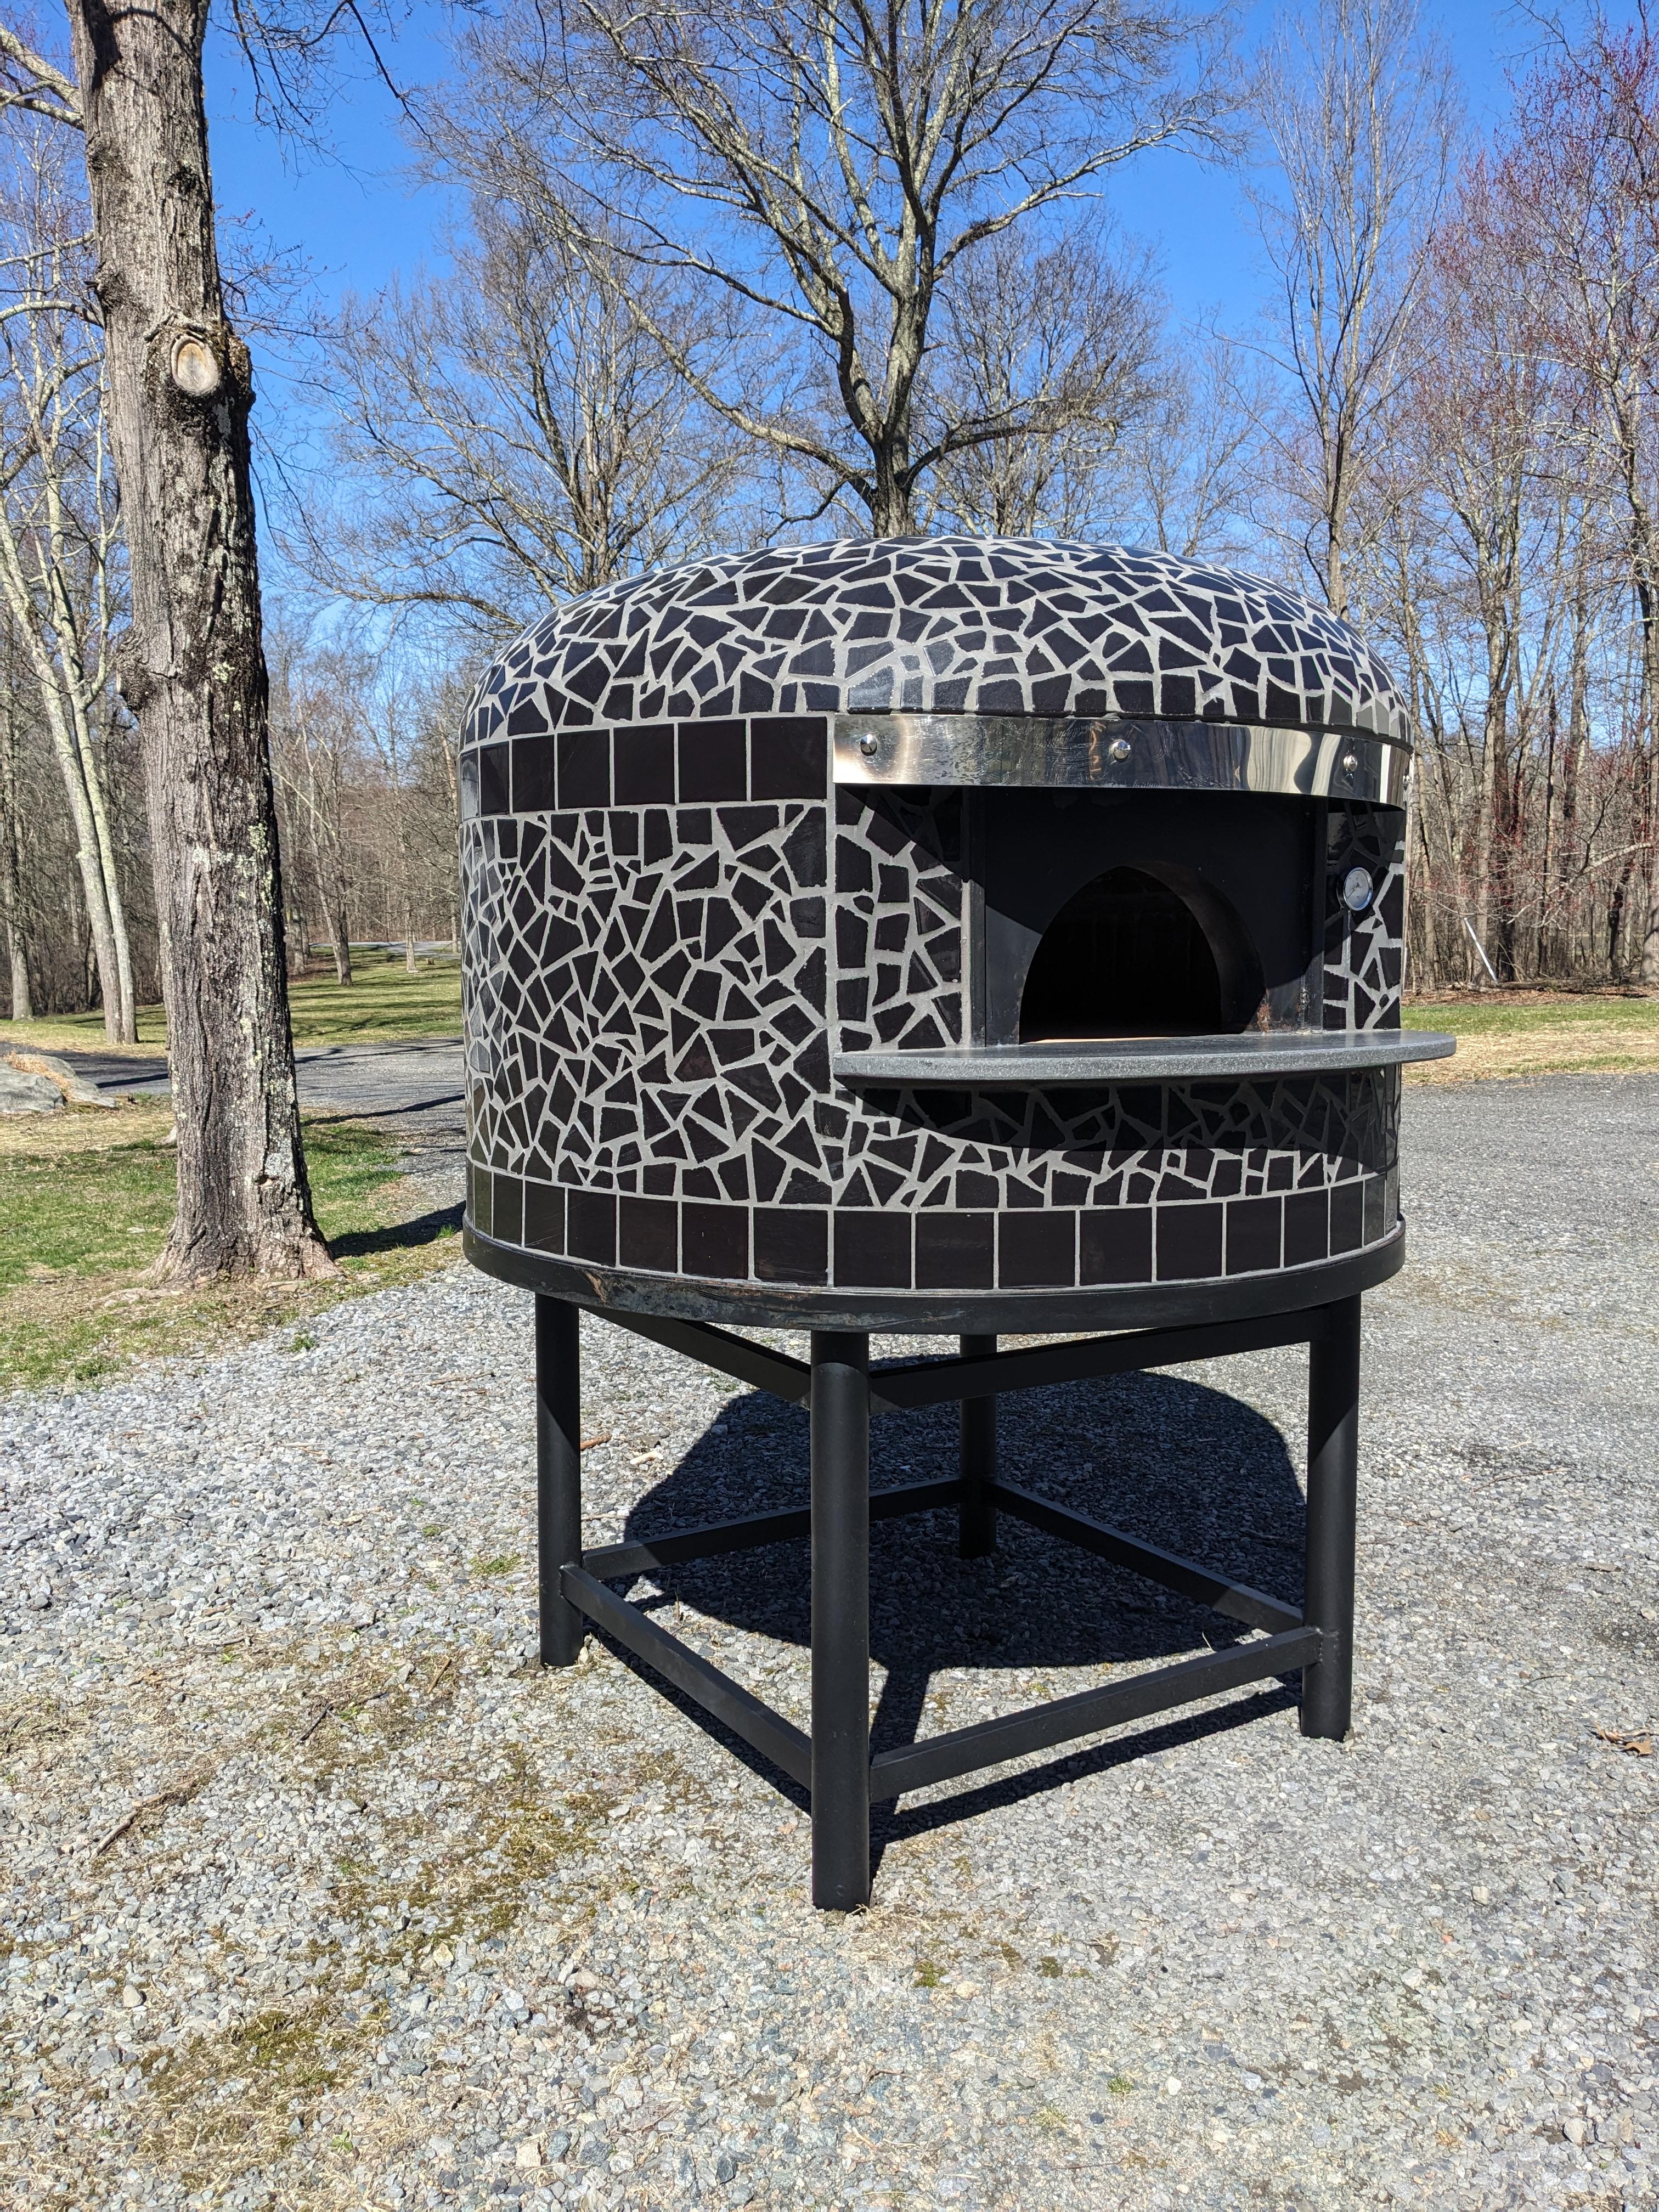 Authentic Neapolitan style wood-fired pizza oven straight from Italy.

Our pizza ovens are handmade by a 3rd-generation oven maker near Naples, Italy using the highest quality materials in the classic Neapolitan oven tradition.

The classic brick